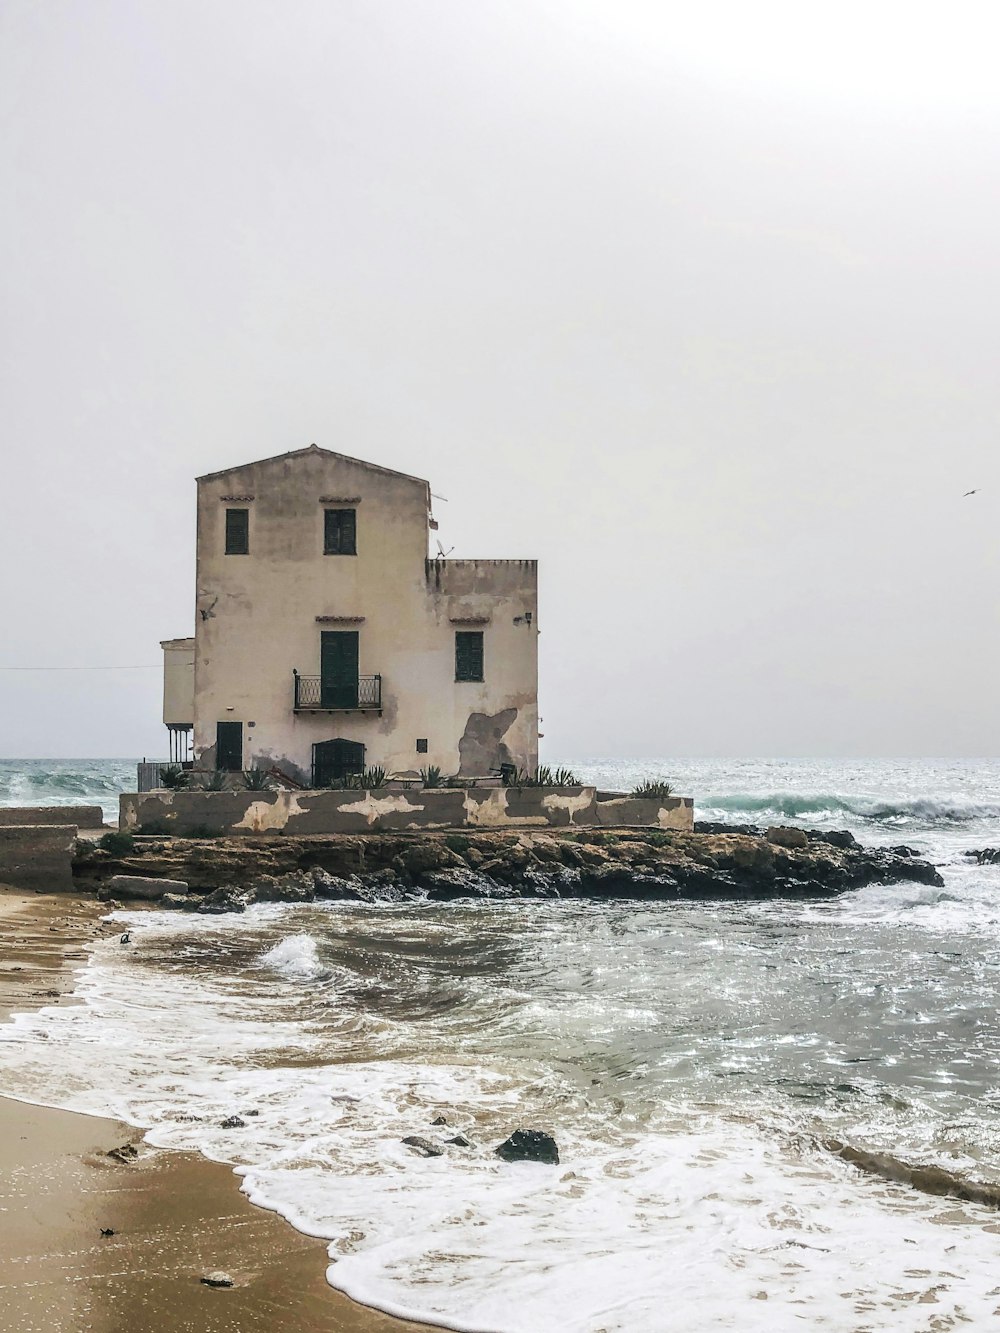 an old building sitting on top of a beach next to the ocean